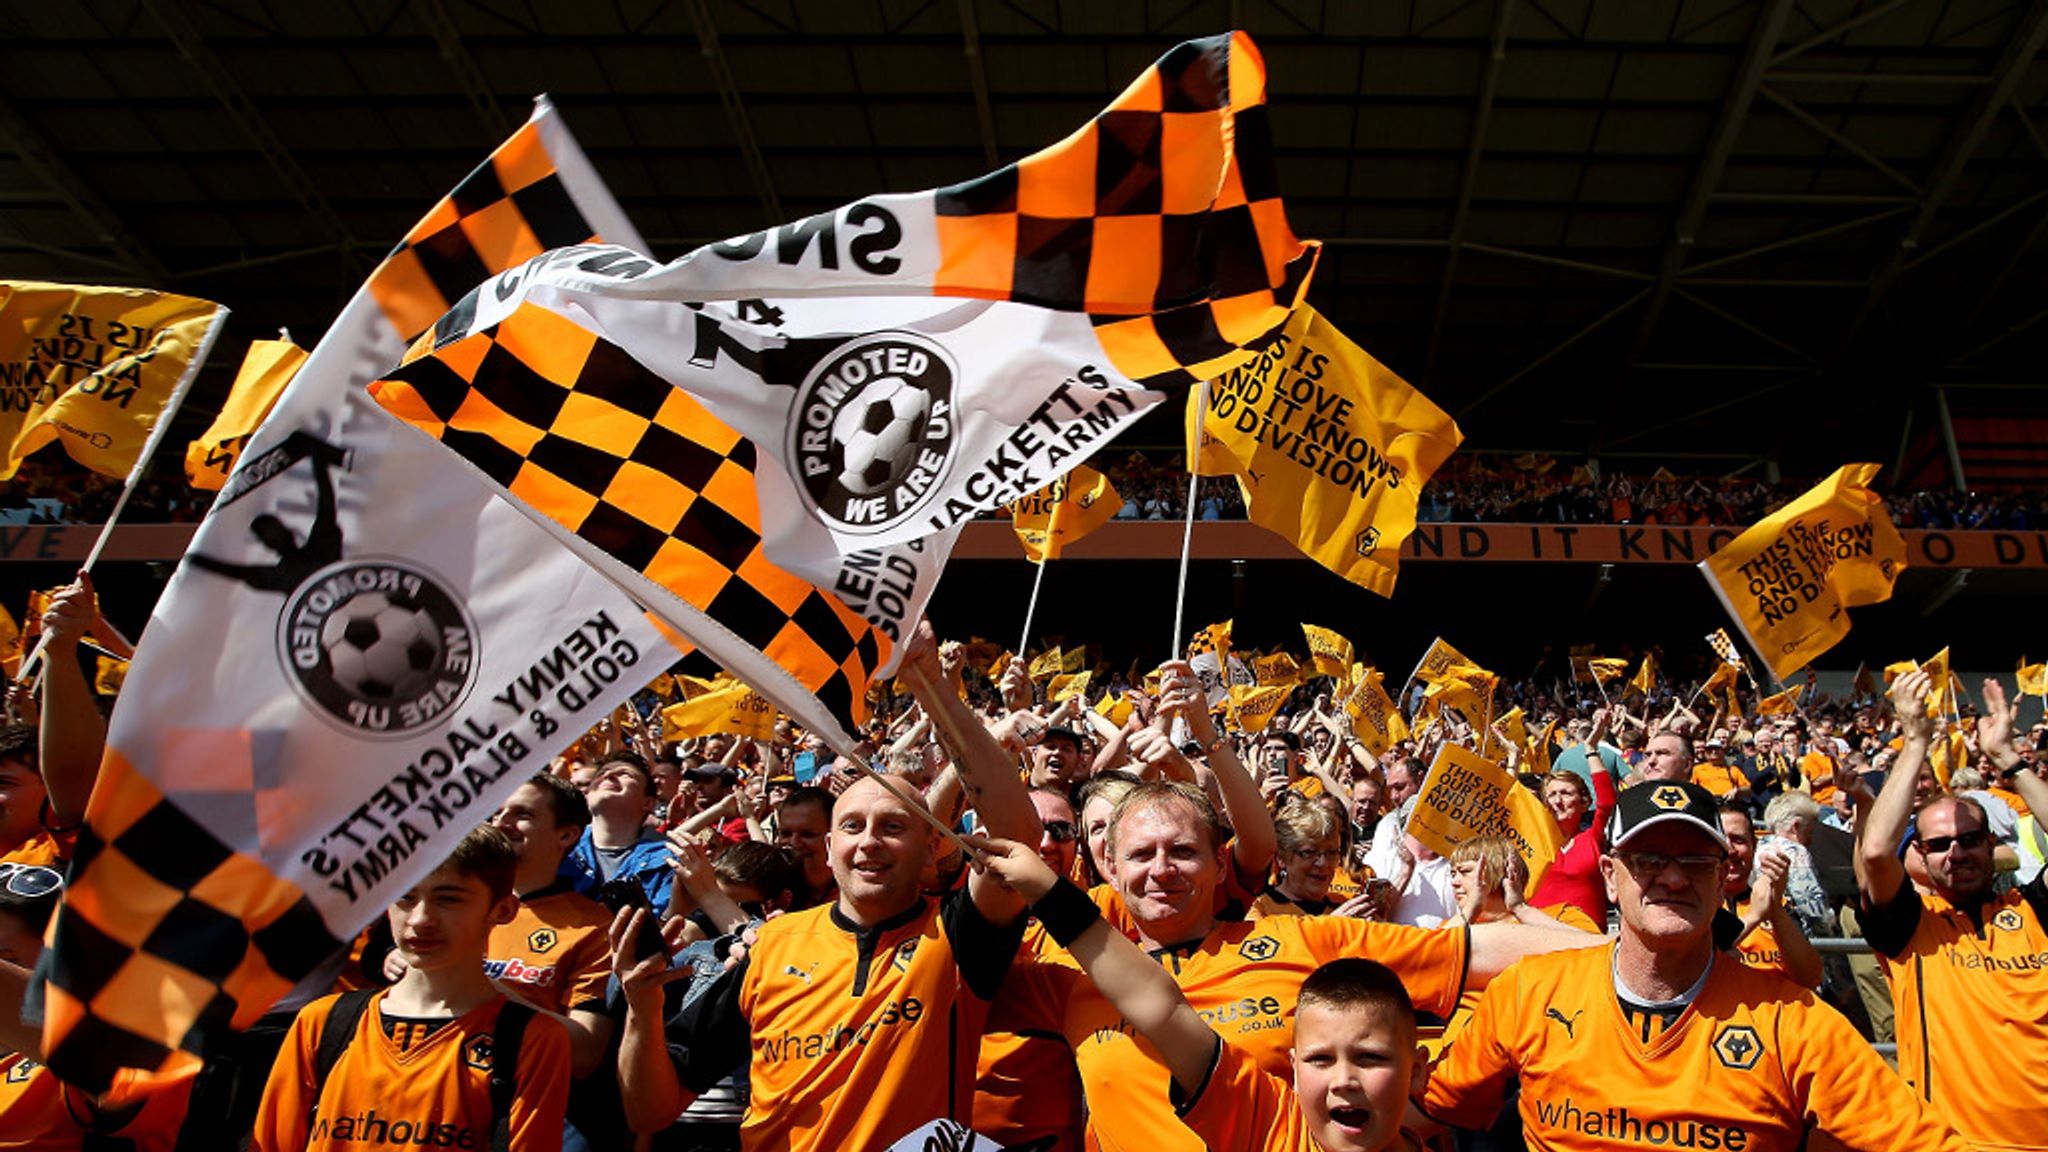 Wolves warned over fan conduct | Football News | Sky Sports